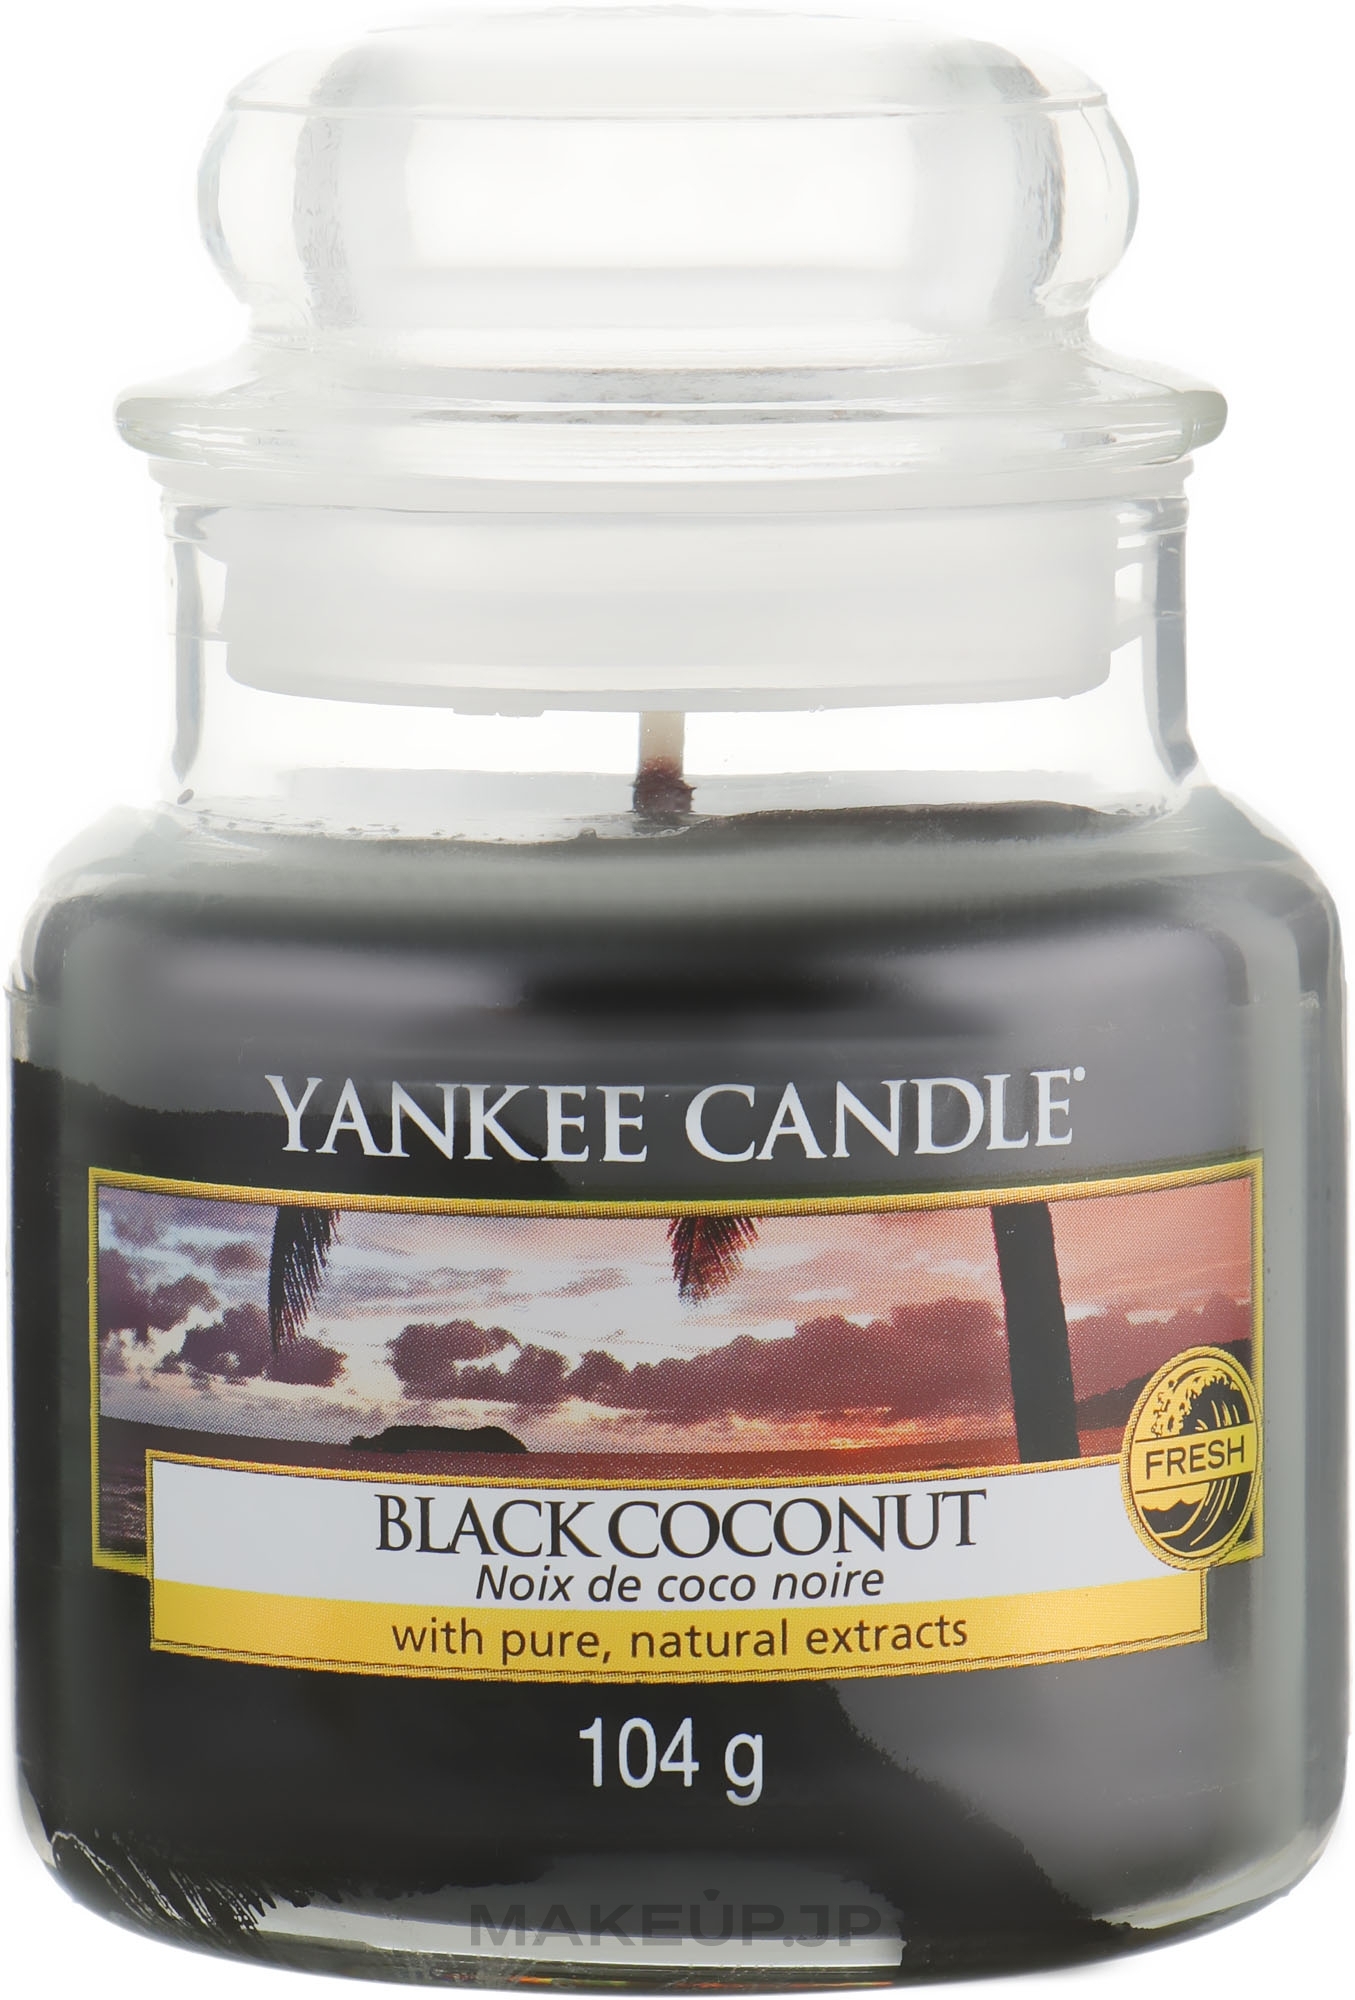 Scented Candle "Black Coconut" - Yankee Candle Black Coconut — photo 104 g